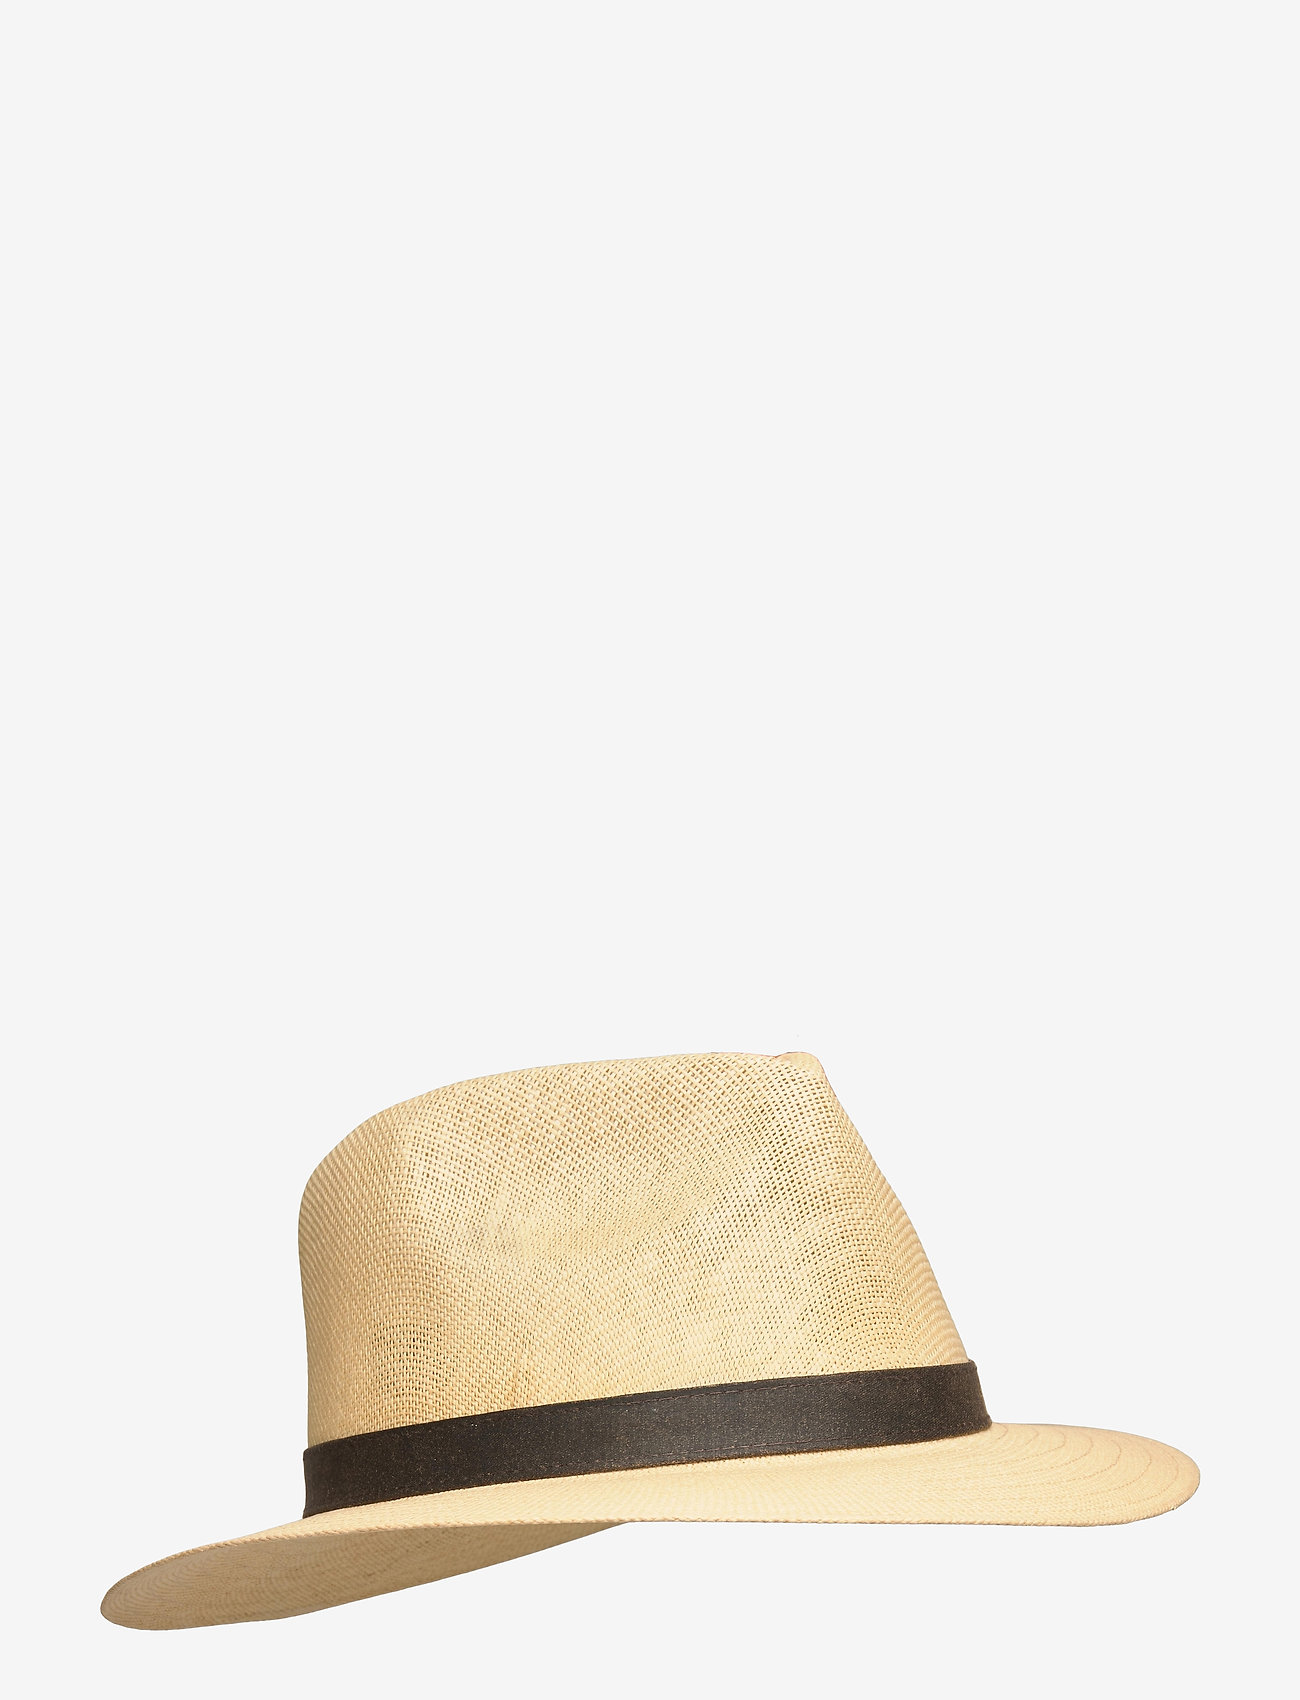 Wigéns - Fedora Country Hat - hatter - natural - 0